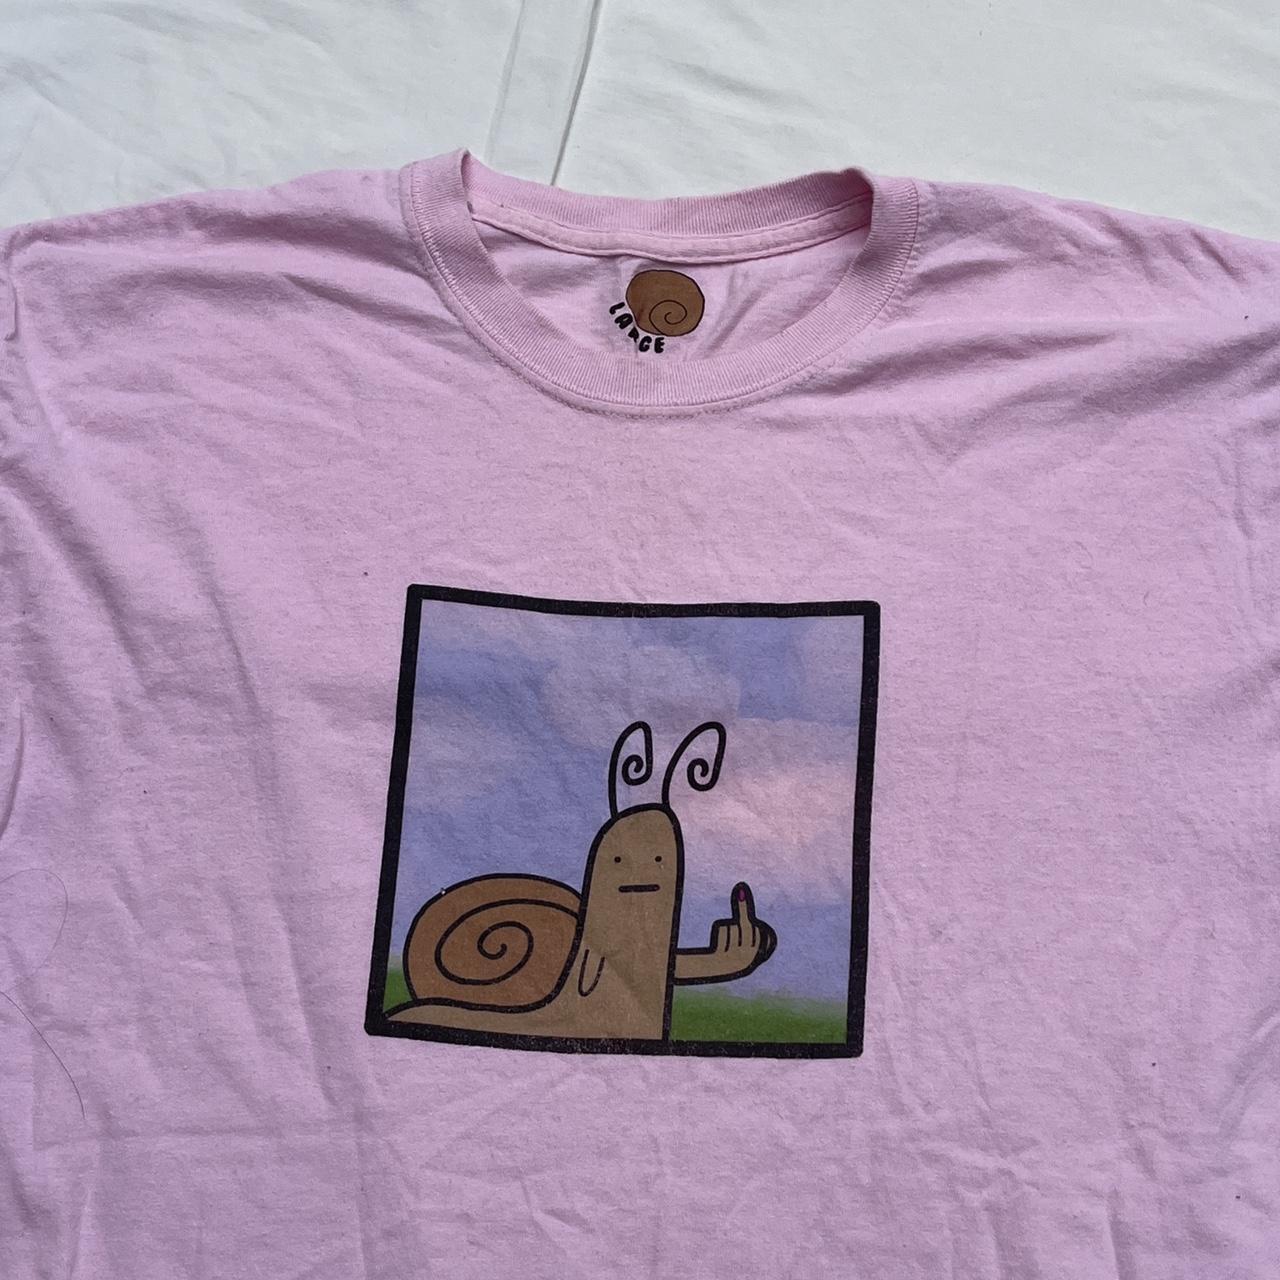 tee flippin - off ya red... Depop he pink graphic snail has